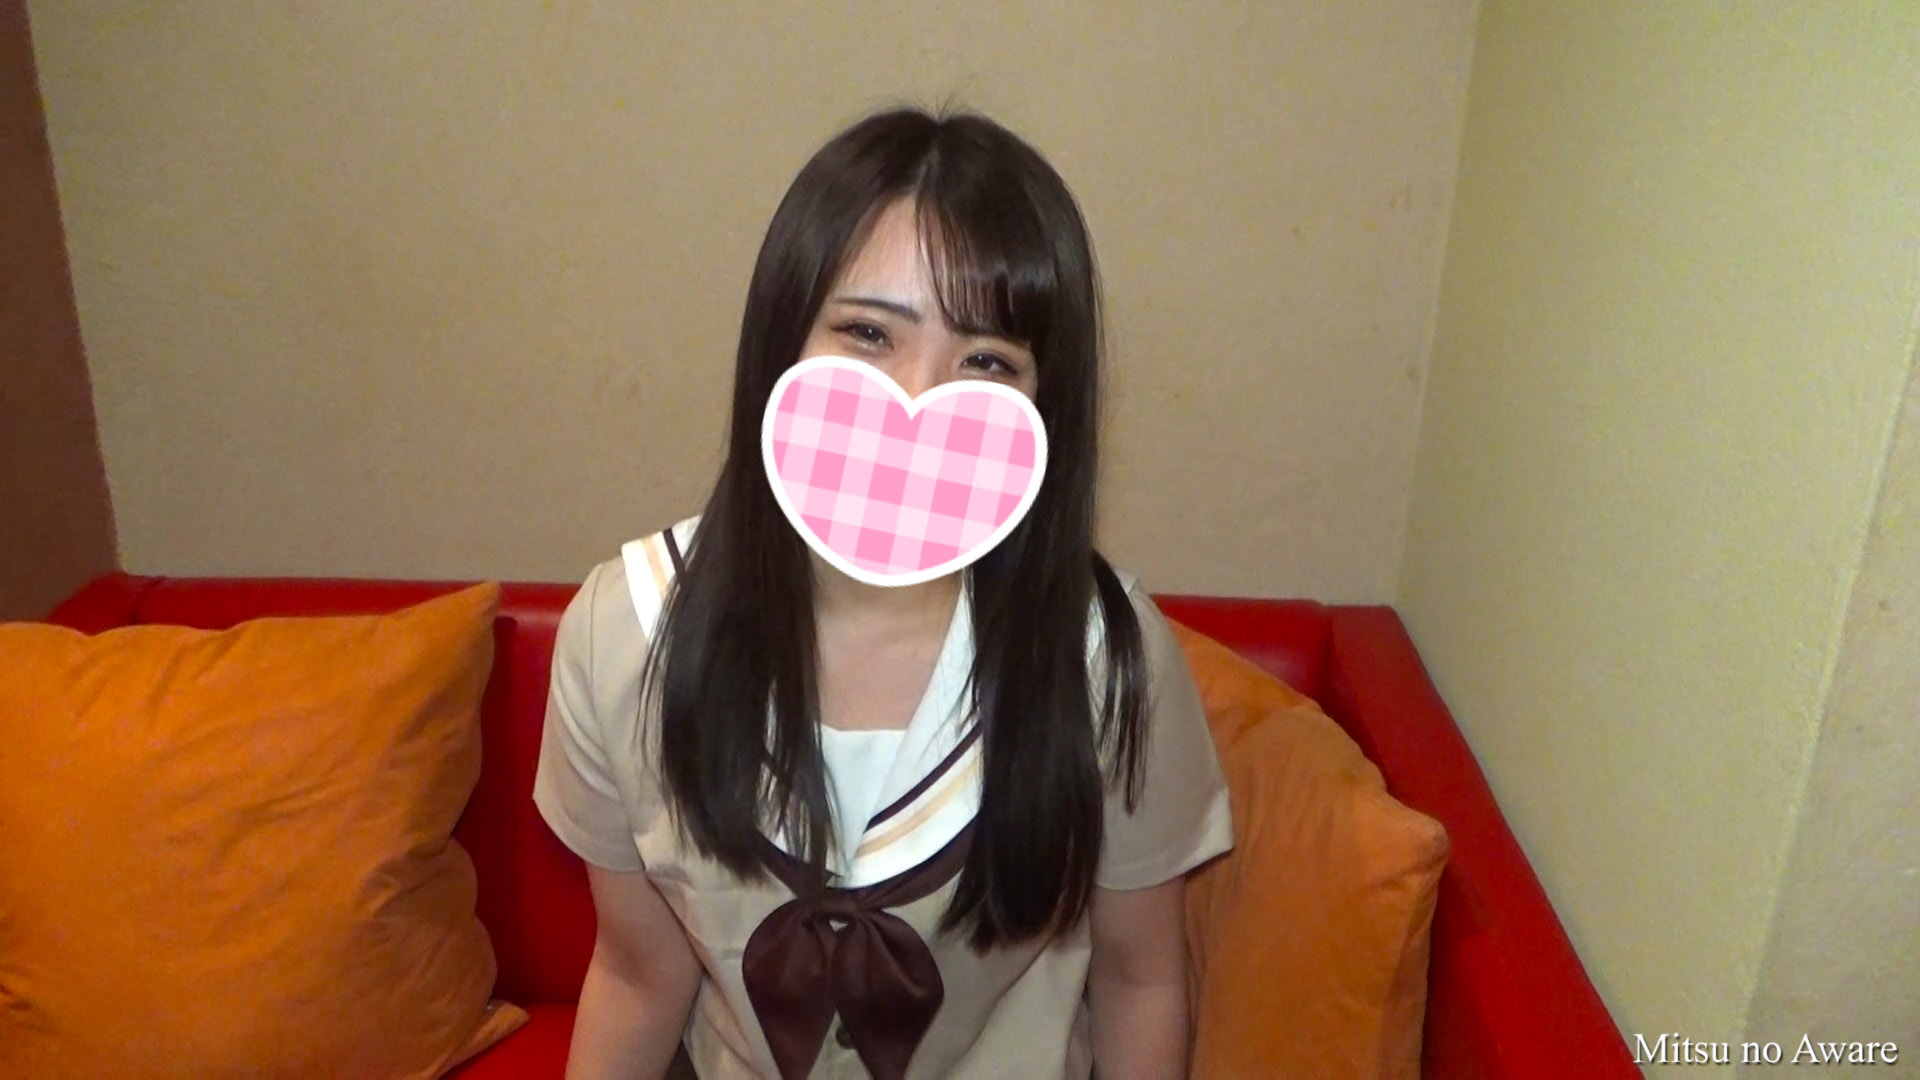 First shot first vaginal cum shot Neat and clean refre lady in a apt uniform Mana-chan said Creampie is not good but it feels too good and unauthorized vaginal cum shot Scoop sperm and reinsert re-edit